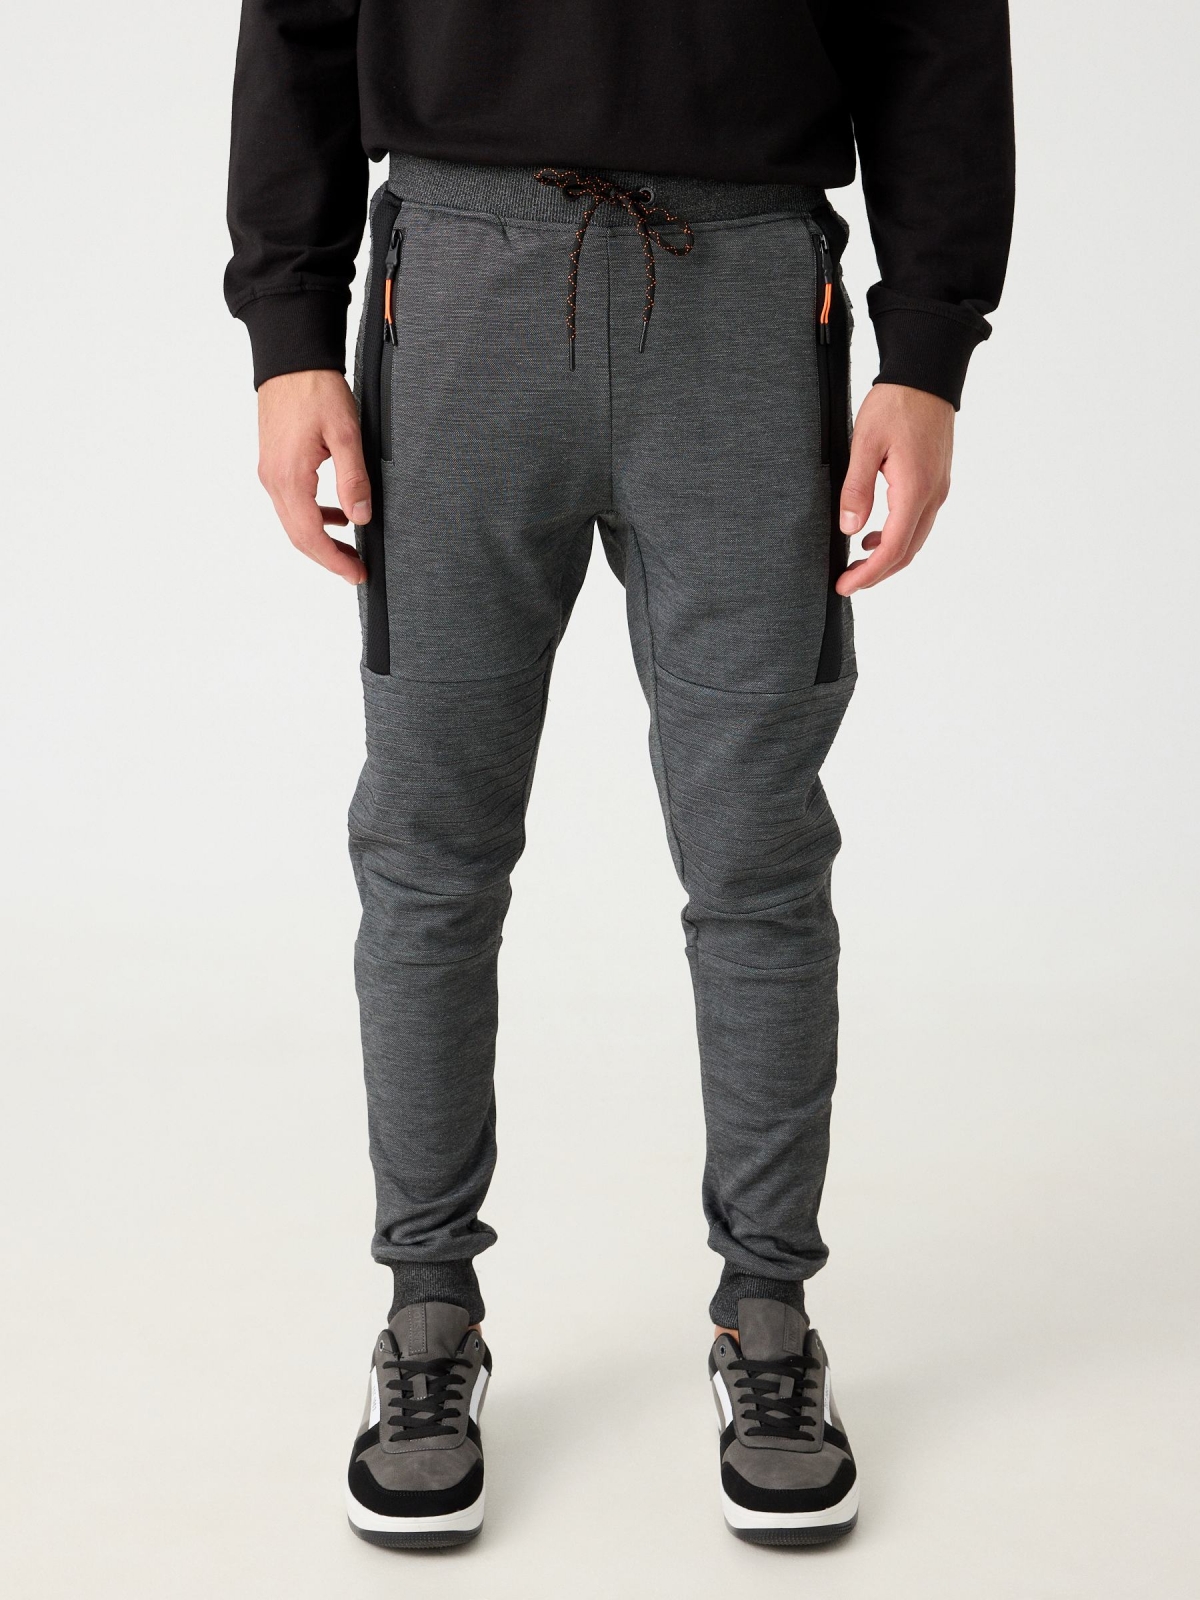 Jogger pants with zippers black middle front view